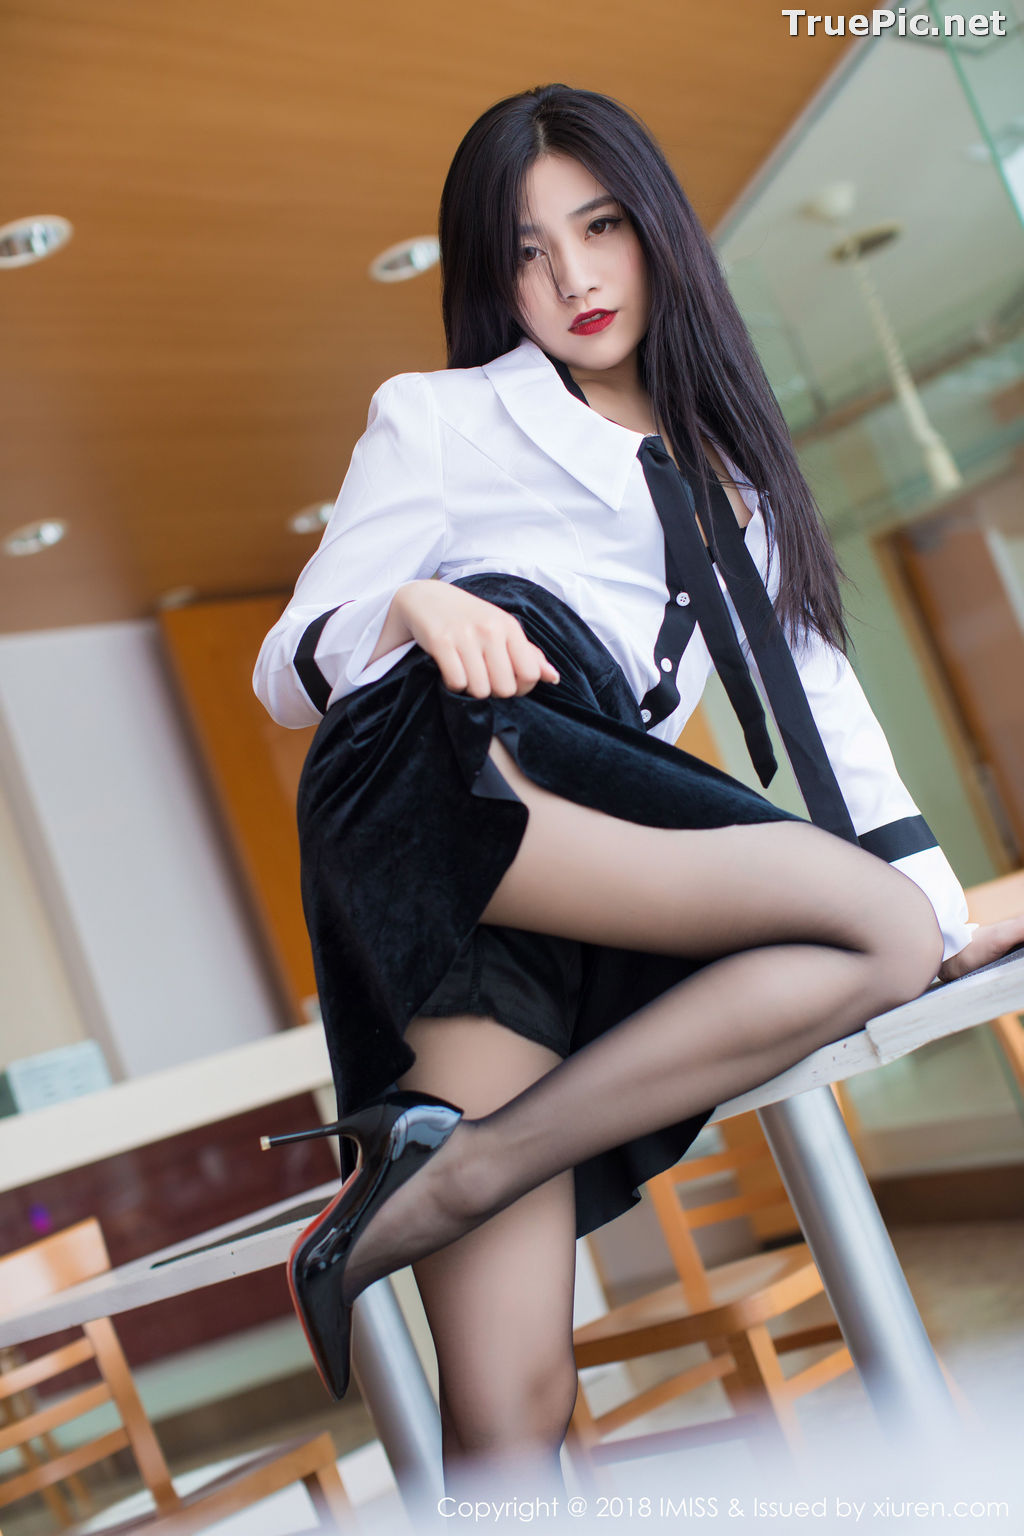 Image IMISS Vol.239 - Chinese Model - Sabrina (Xu Nuo 许诺) - Office Girl - TruePic.net - Picture-31